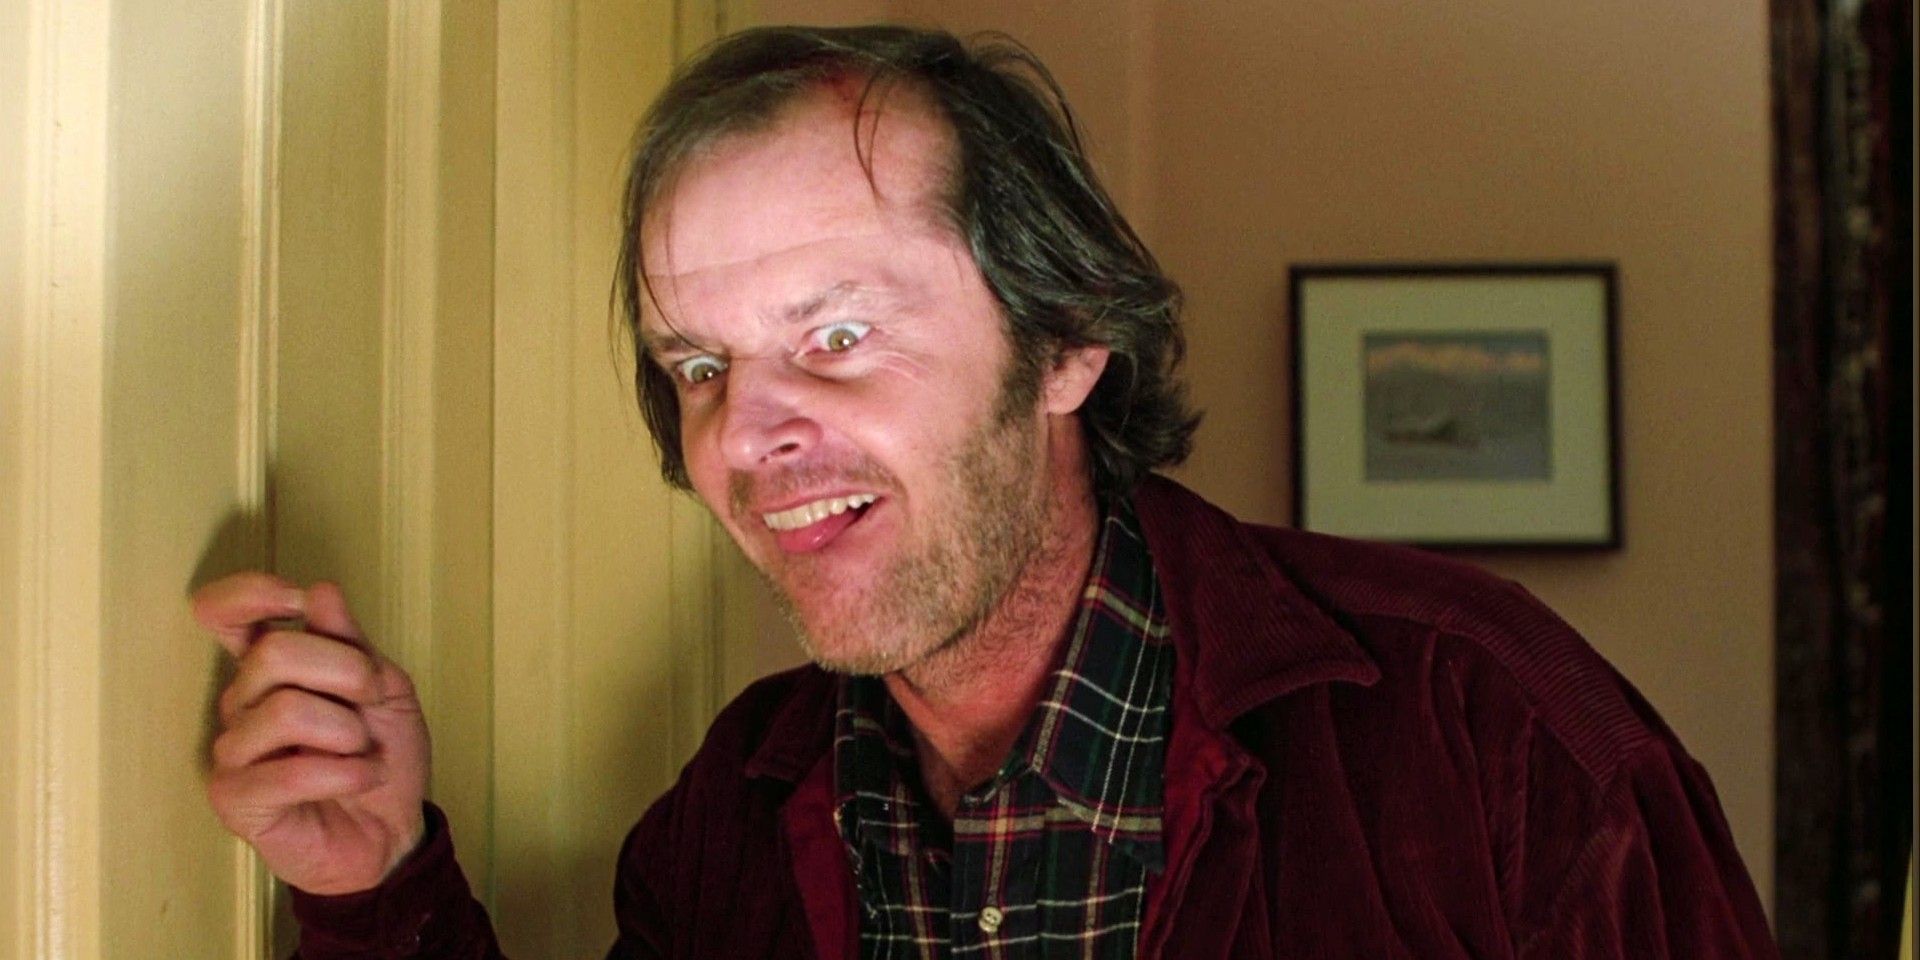 Jack Torrence knocking on the door in The Shining